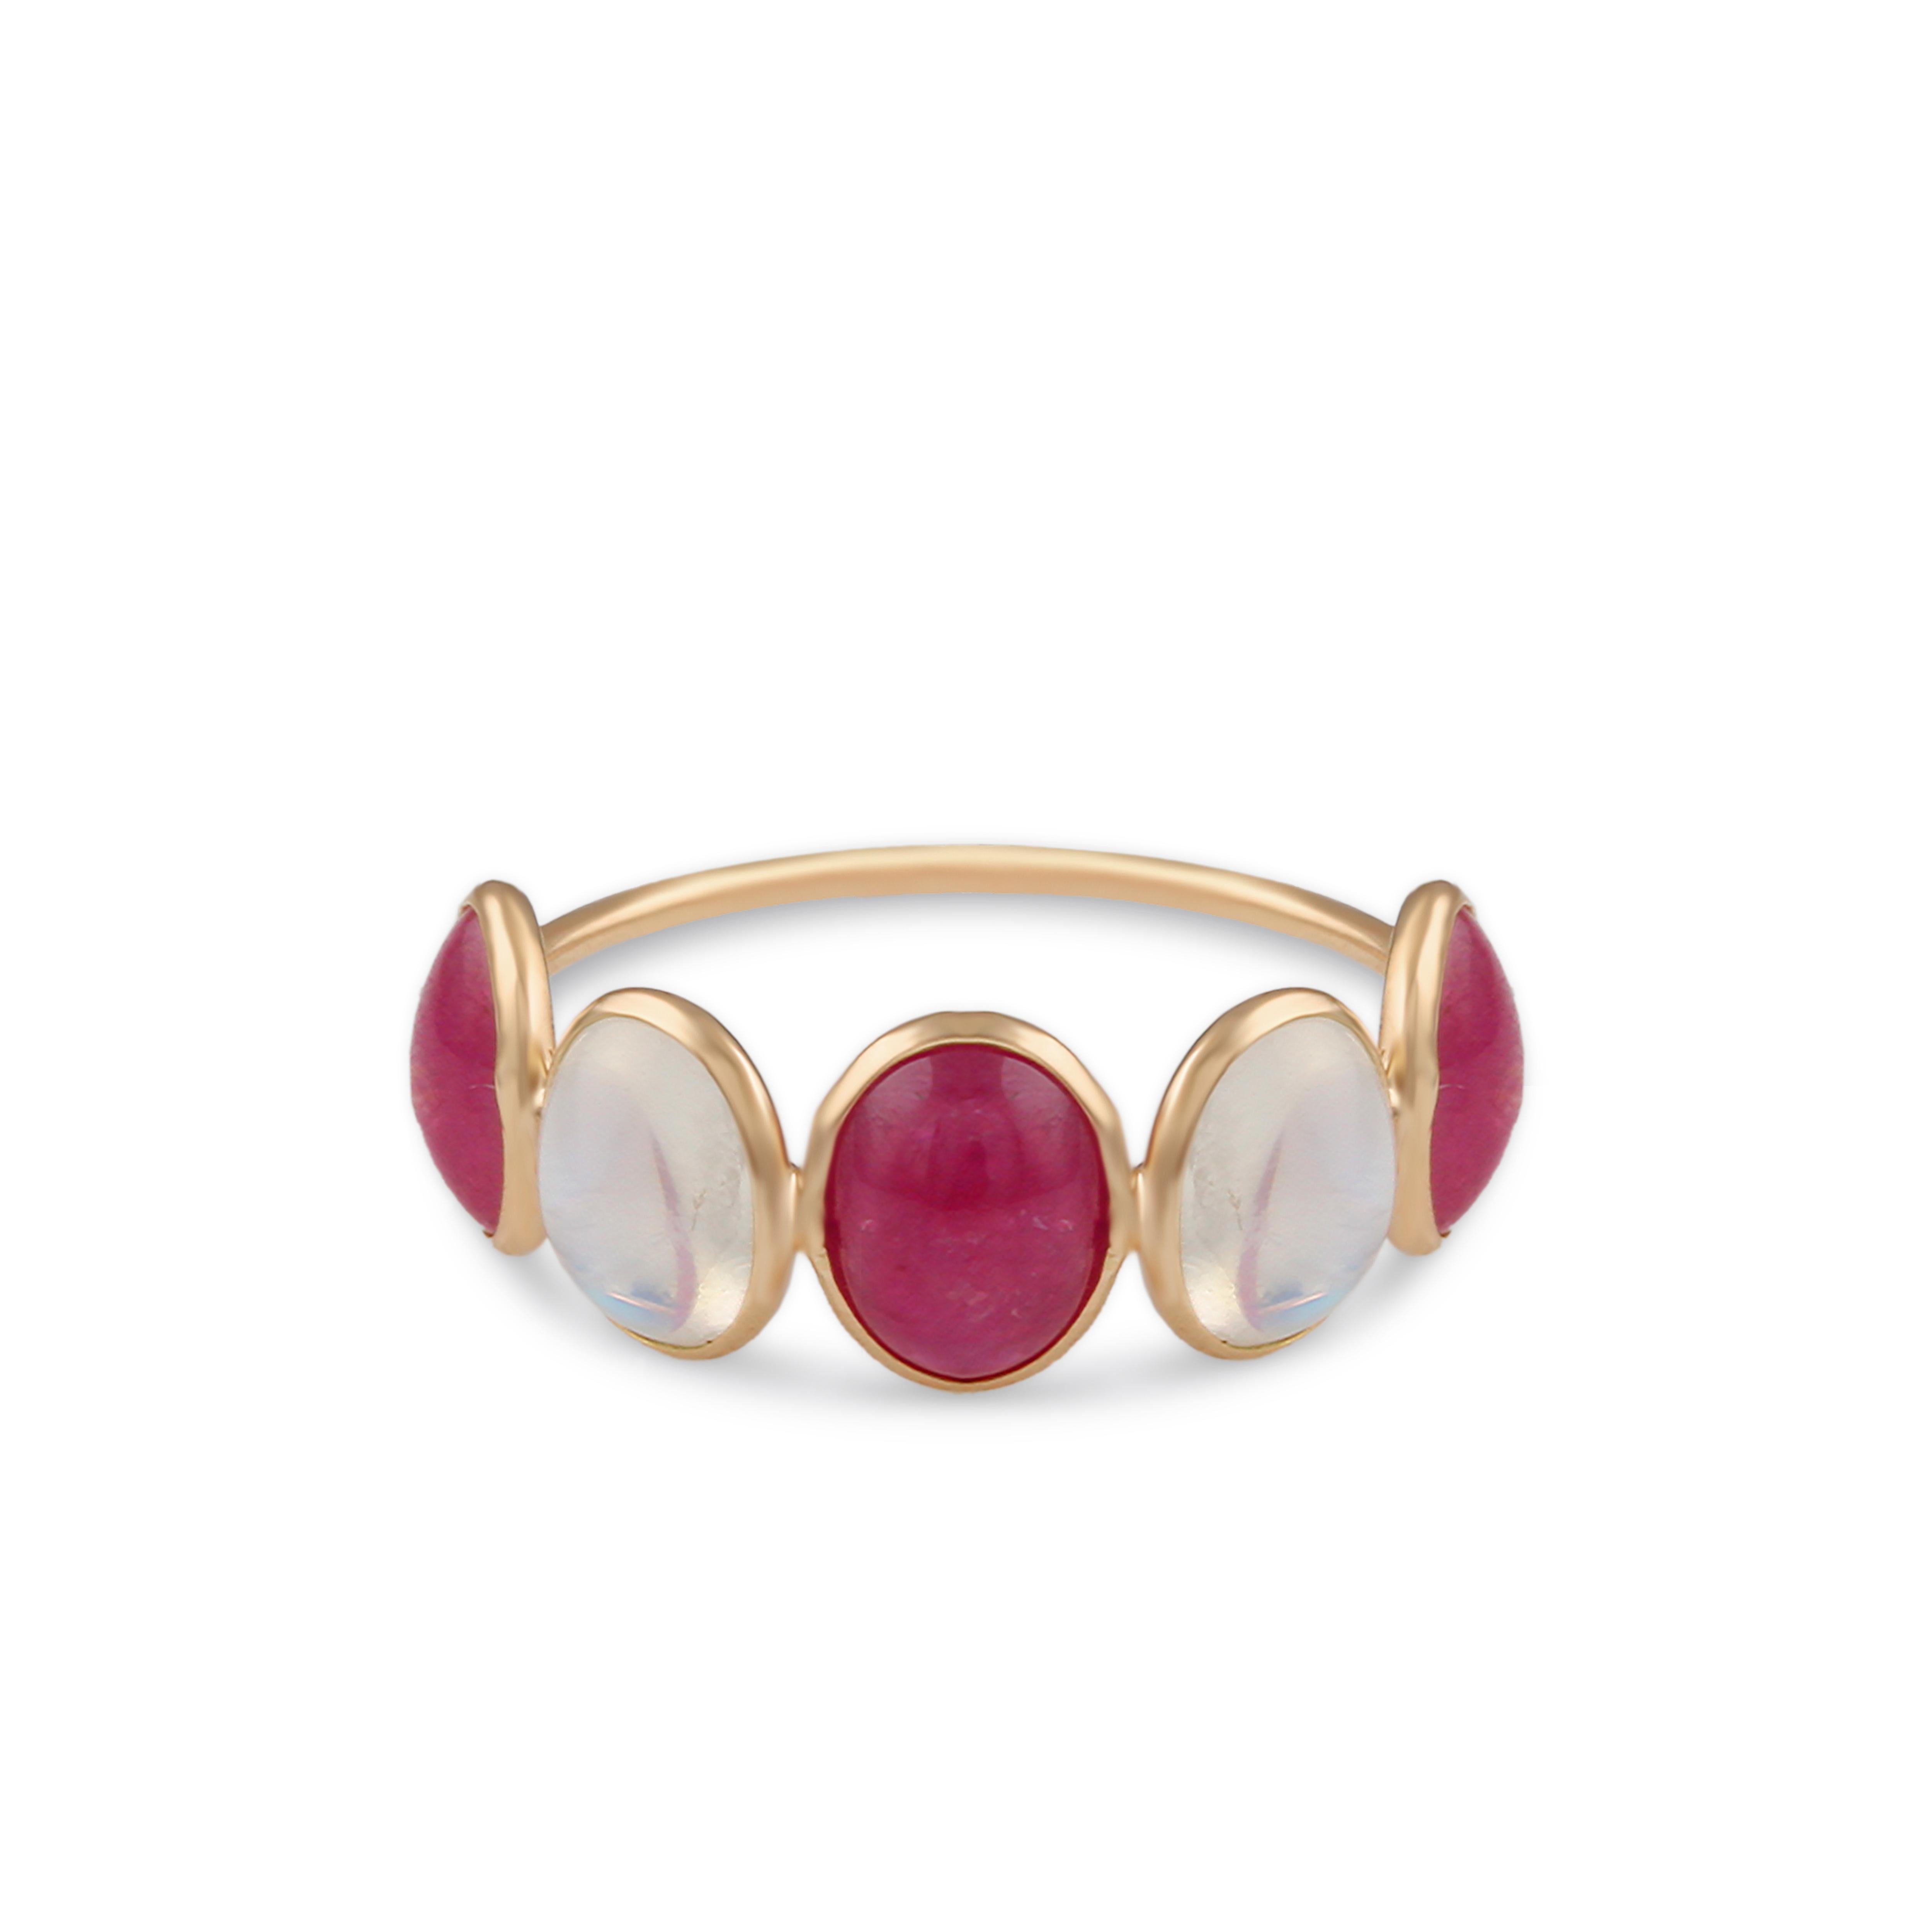 Tresor Beautiful Ring feature 7.15 carats of Gemstone. The Ring are an ode to the luxurious yet classic beauty with sparkly gemstones and feminine hues. Their contemporary and modern design make them perfect and versatile to be worn at any occasion. 